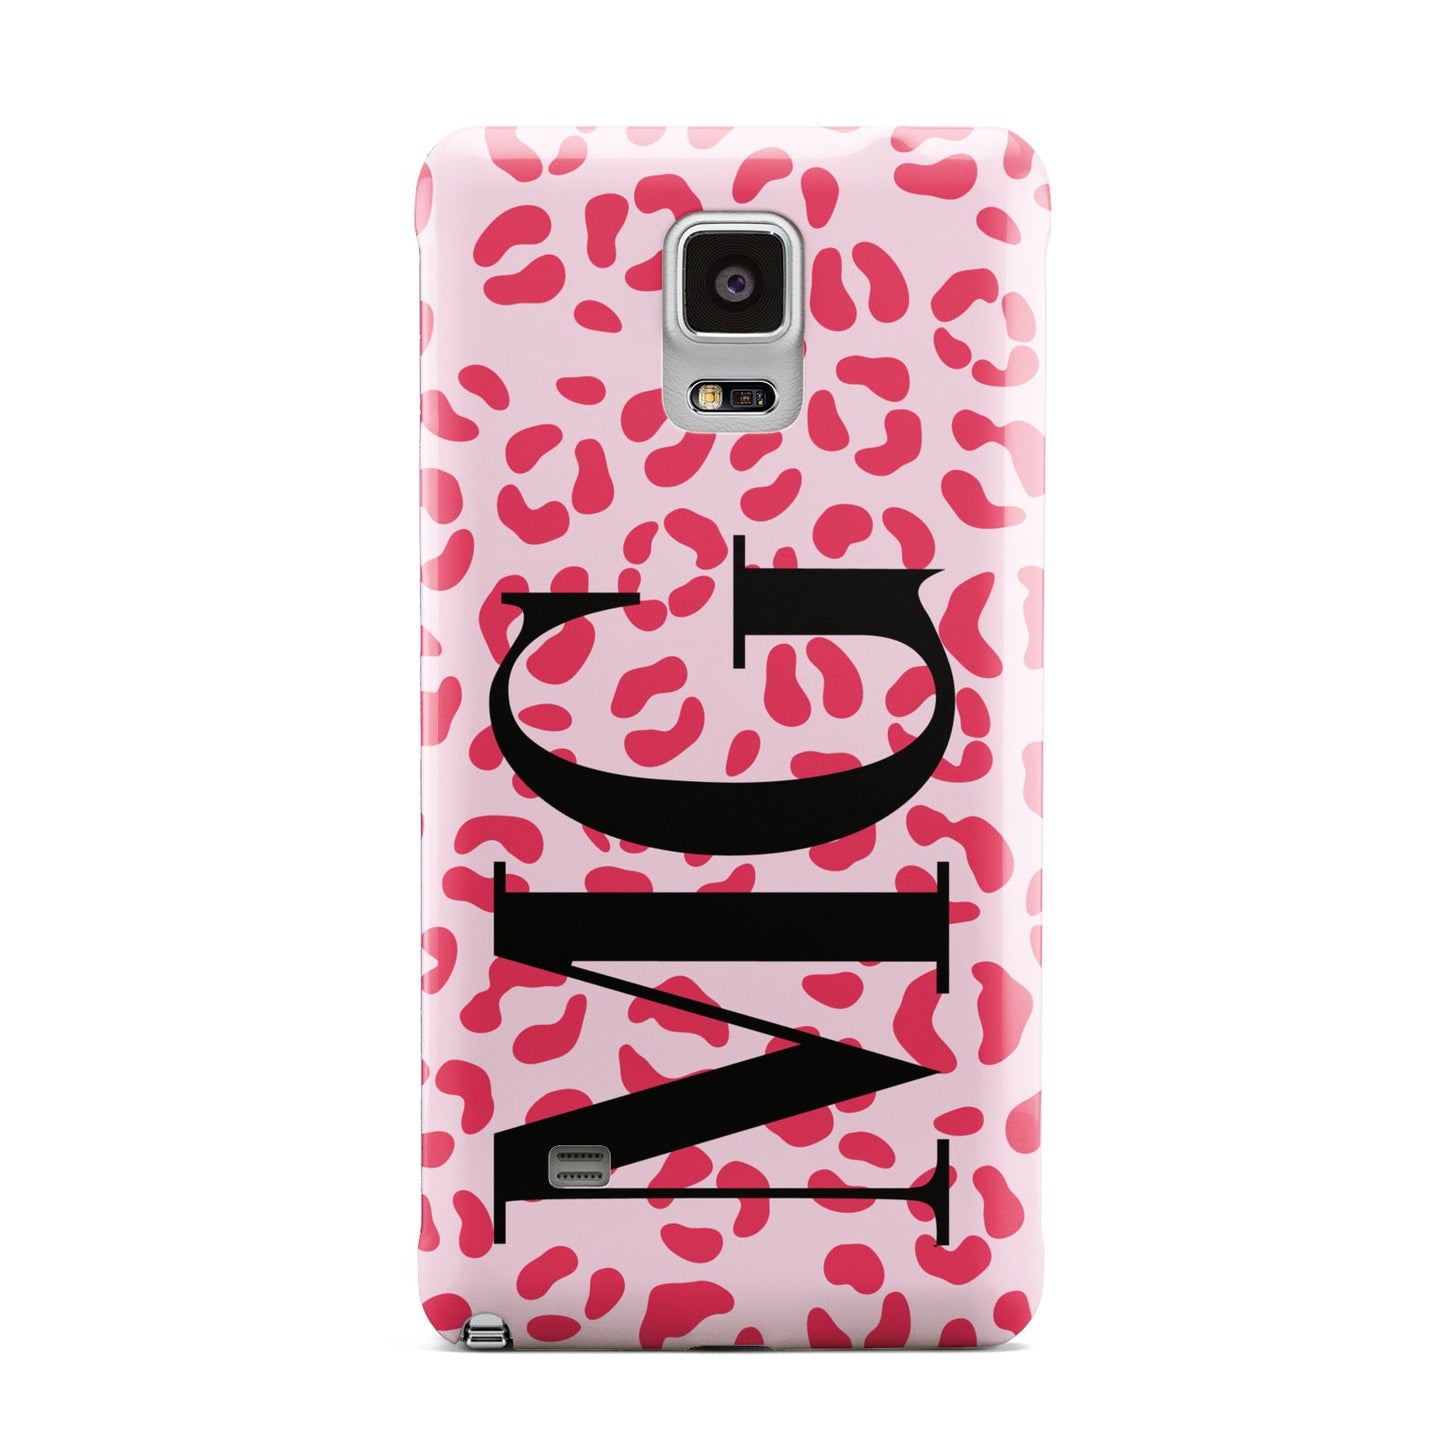 Personalised Leopard Print Initials Samsung Galaxy Note 4 Case